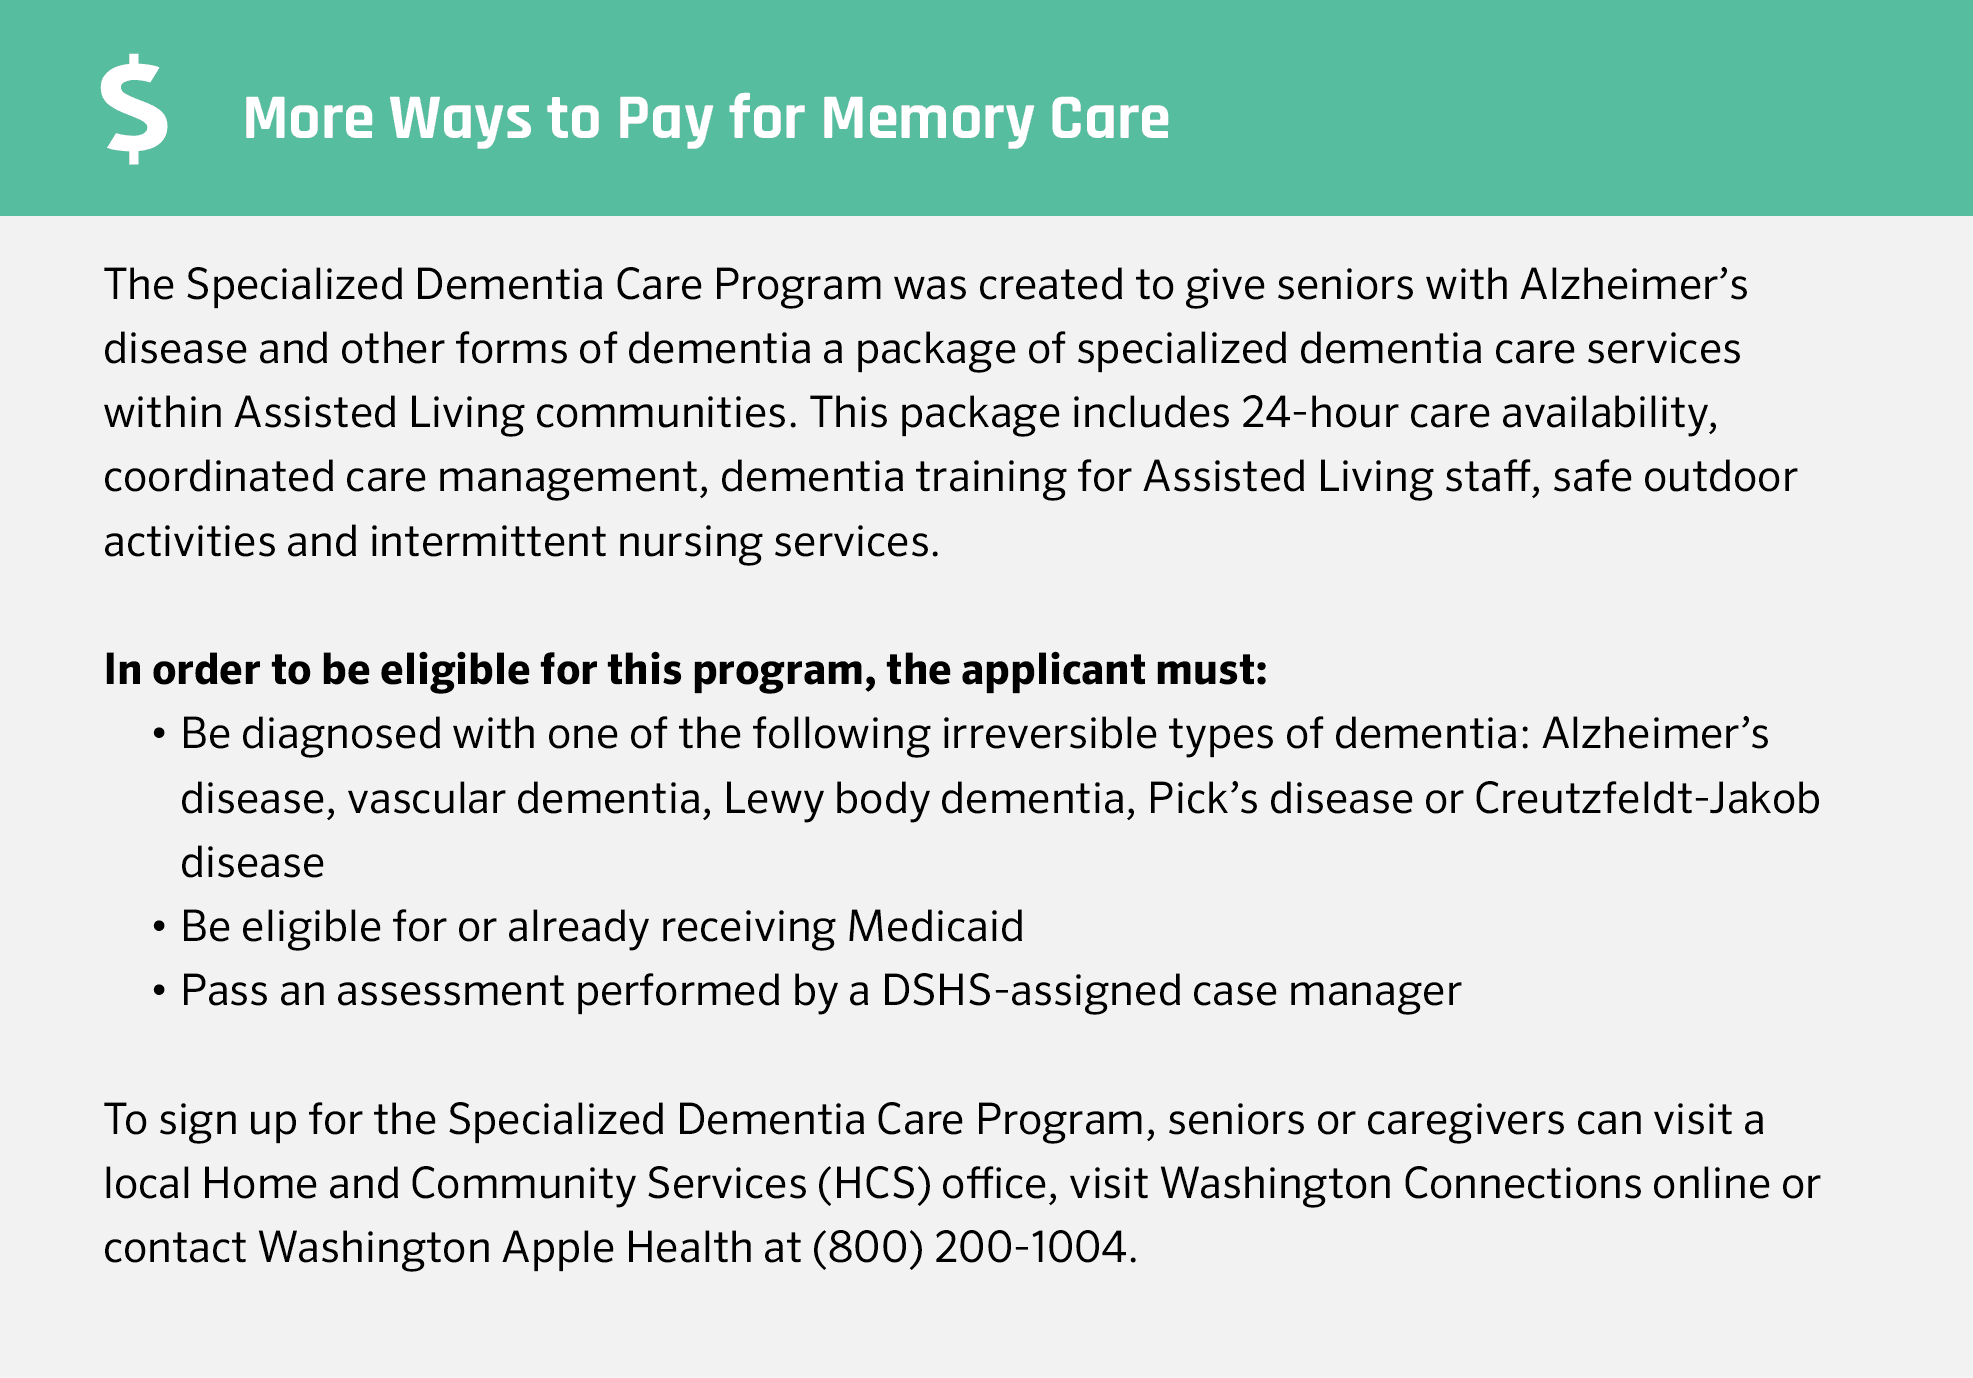 Financial Assistance for Memory Care in Washington